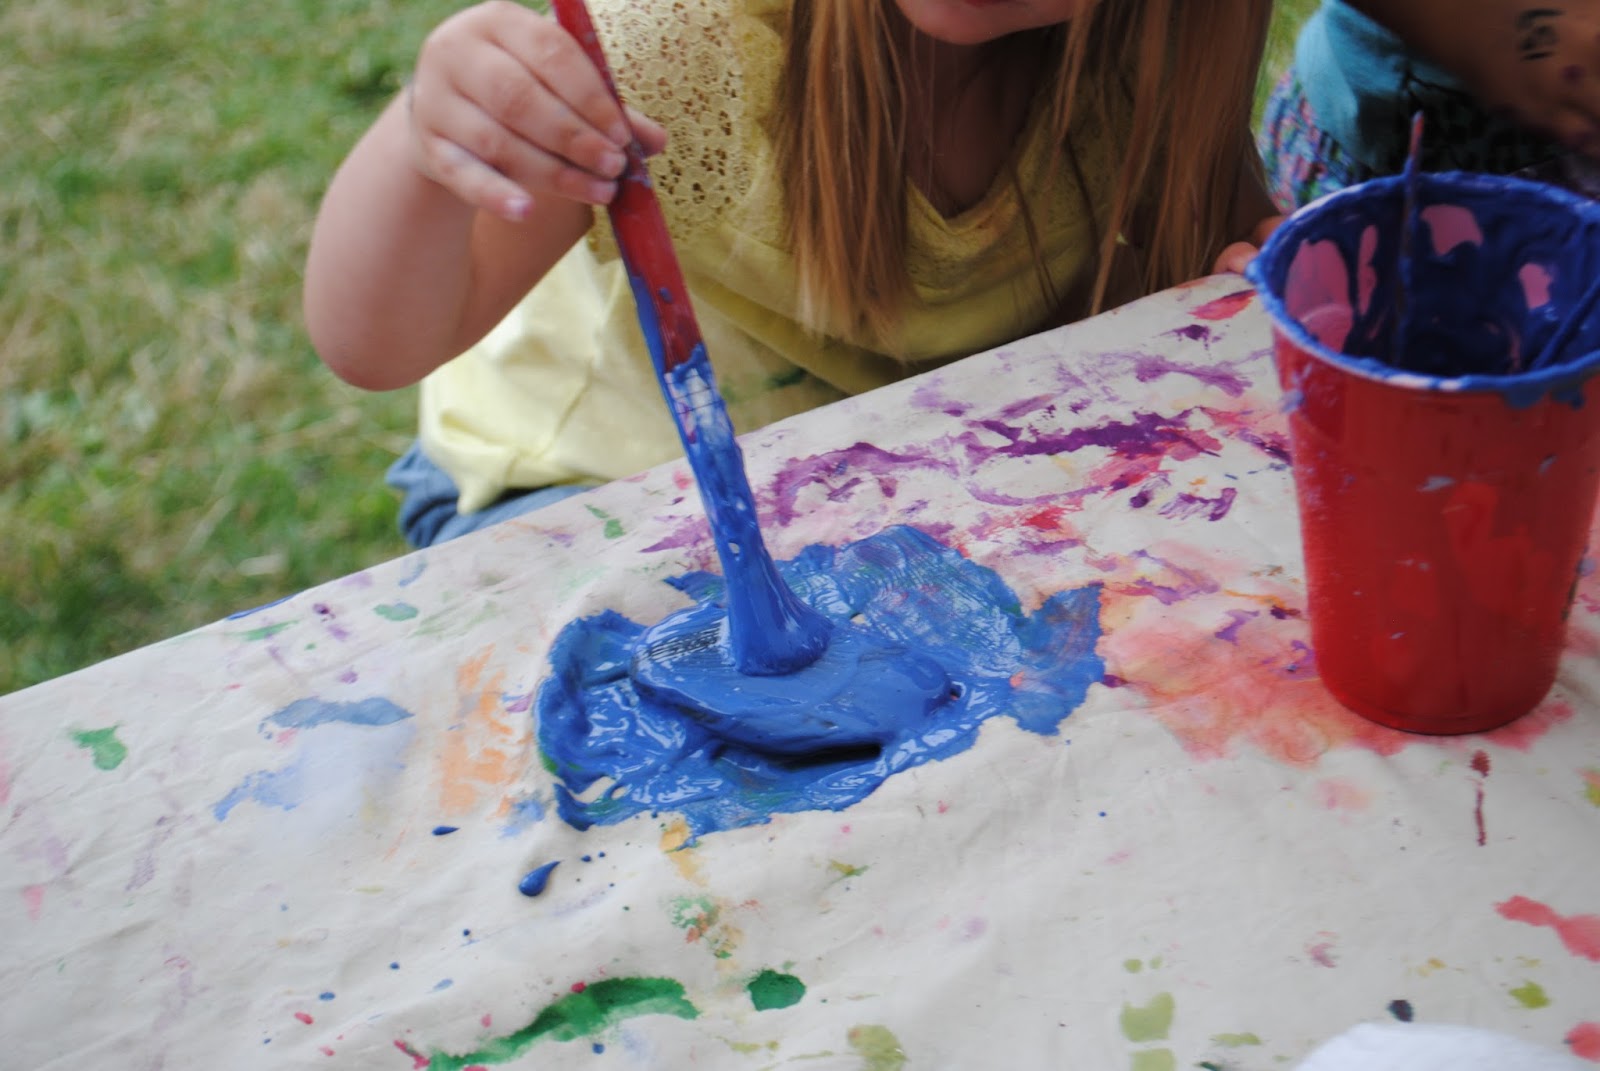 CHILDREN'S FESTIVAL in JACKSONVILLE, OREGON - MAGICAL FUN FOR THE COMMUNITY - What to do in Southern Oregon - Things to do - Kid-Friendly - Events